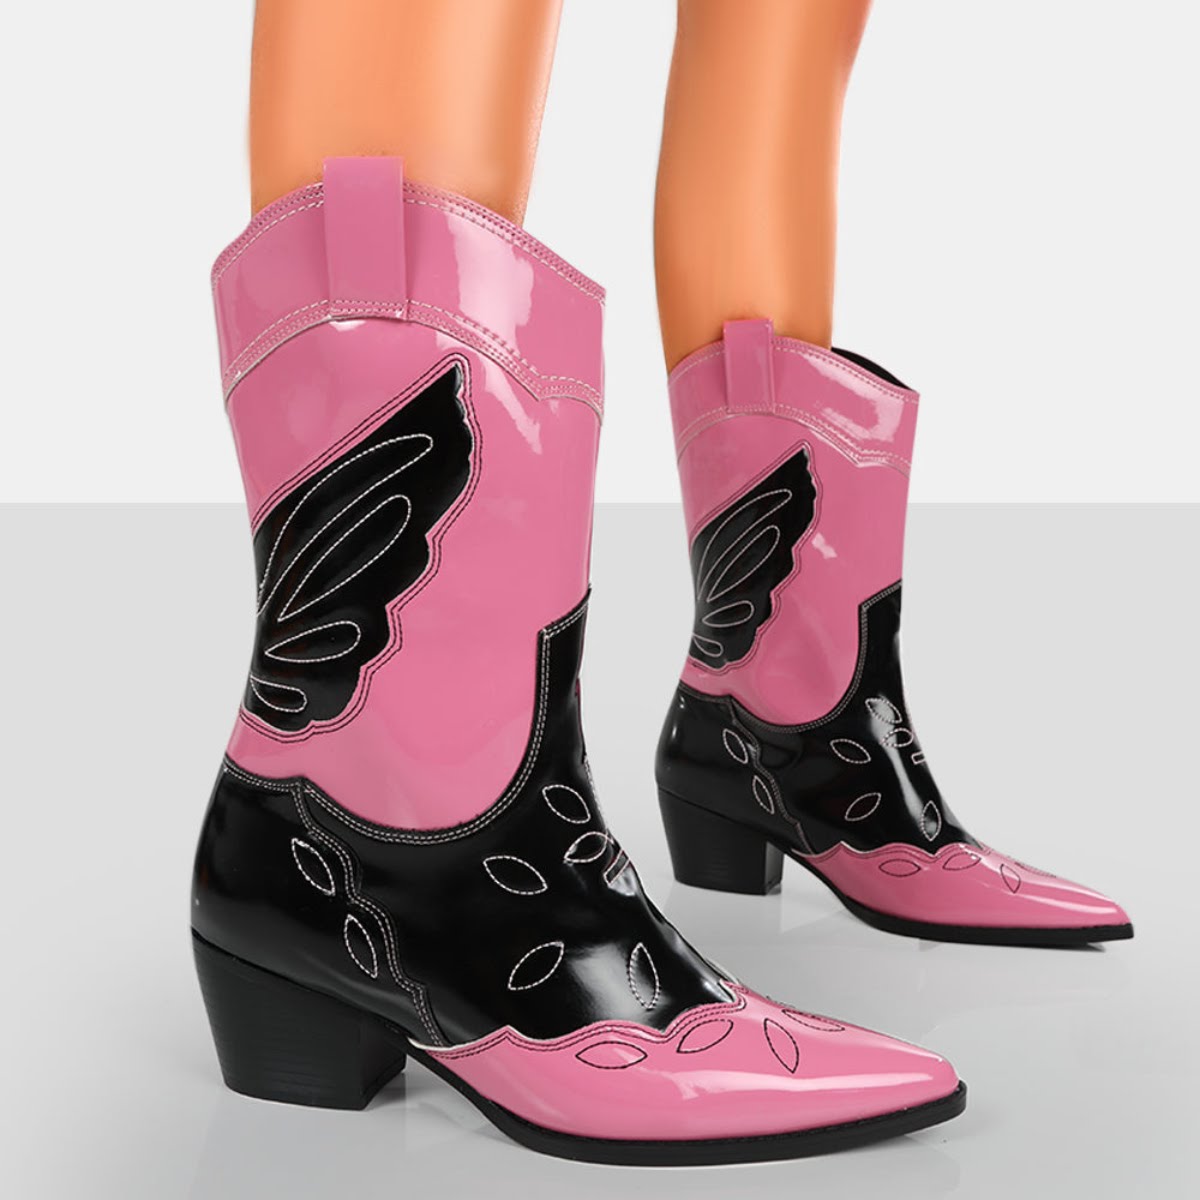 Howdy Pink Patent Pointed Toe Western Cowboy Ankle Boots, €55.99